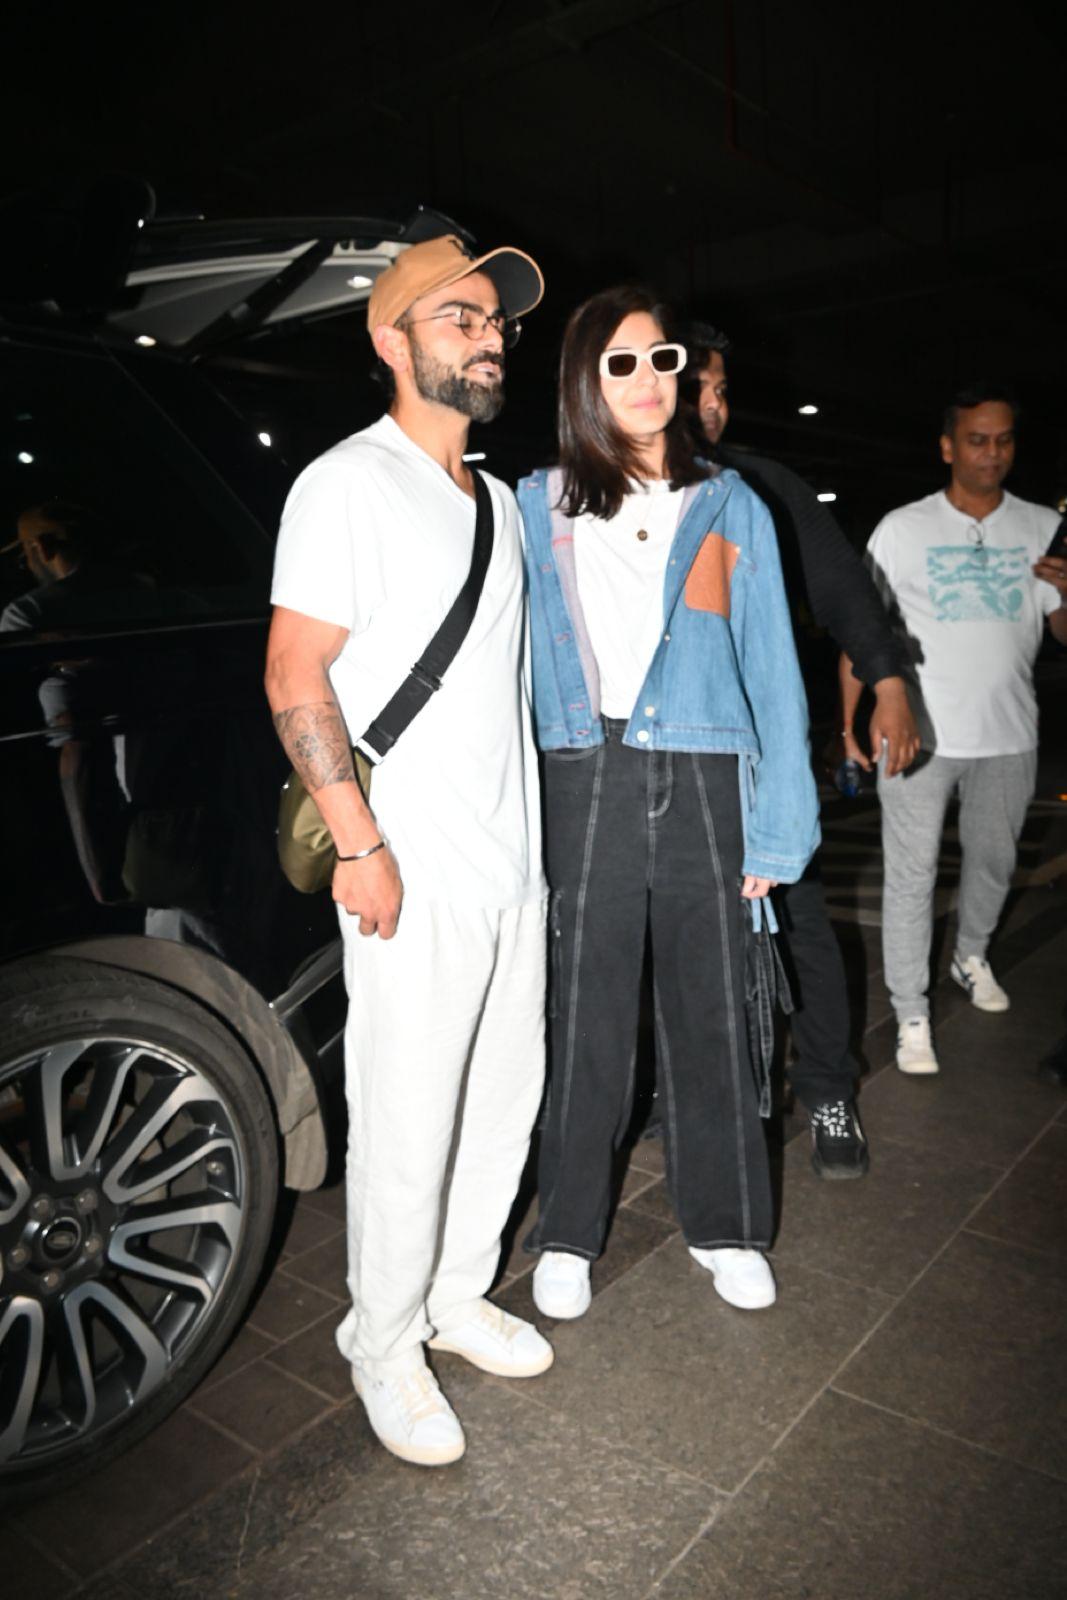 Power couple Anushka Sharma and Virat Kohli's airport appearance was a testament to their style and stature.